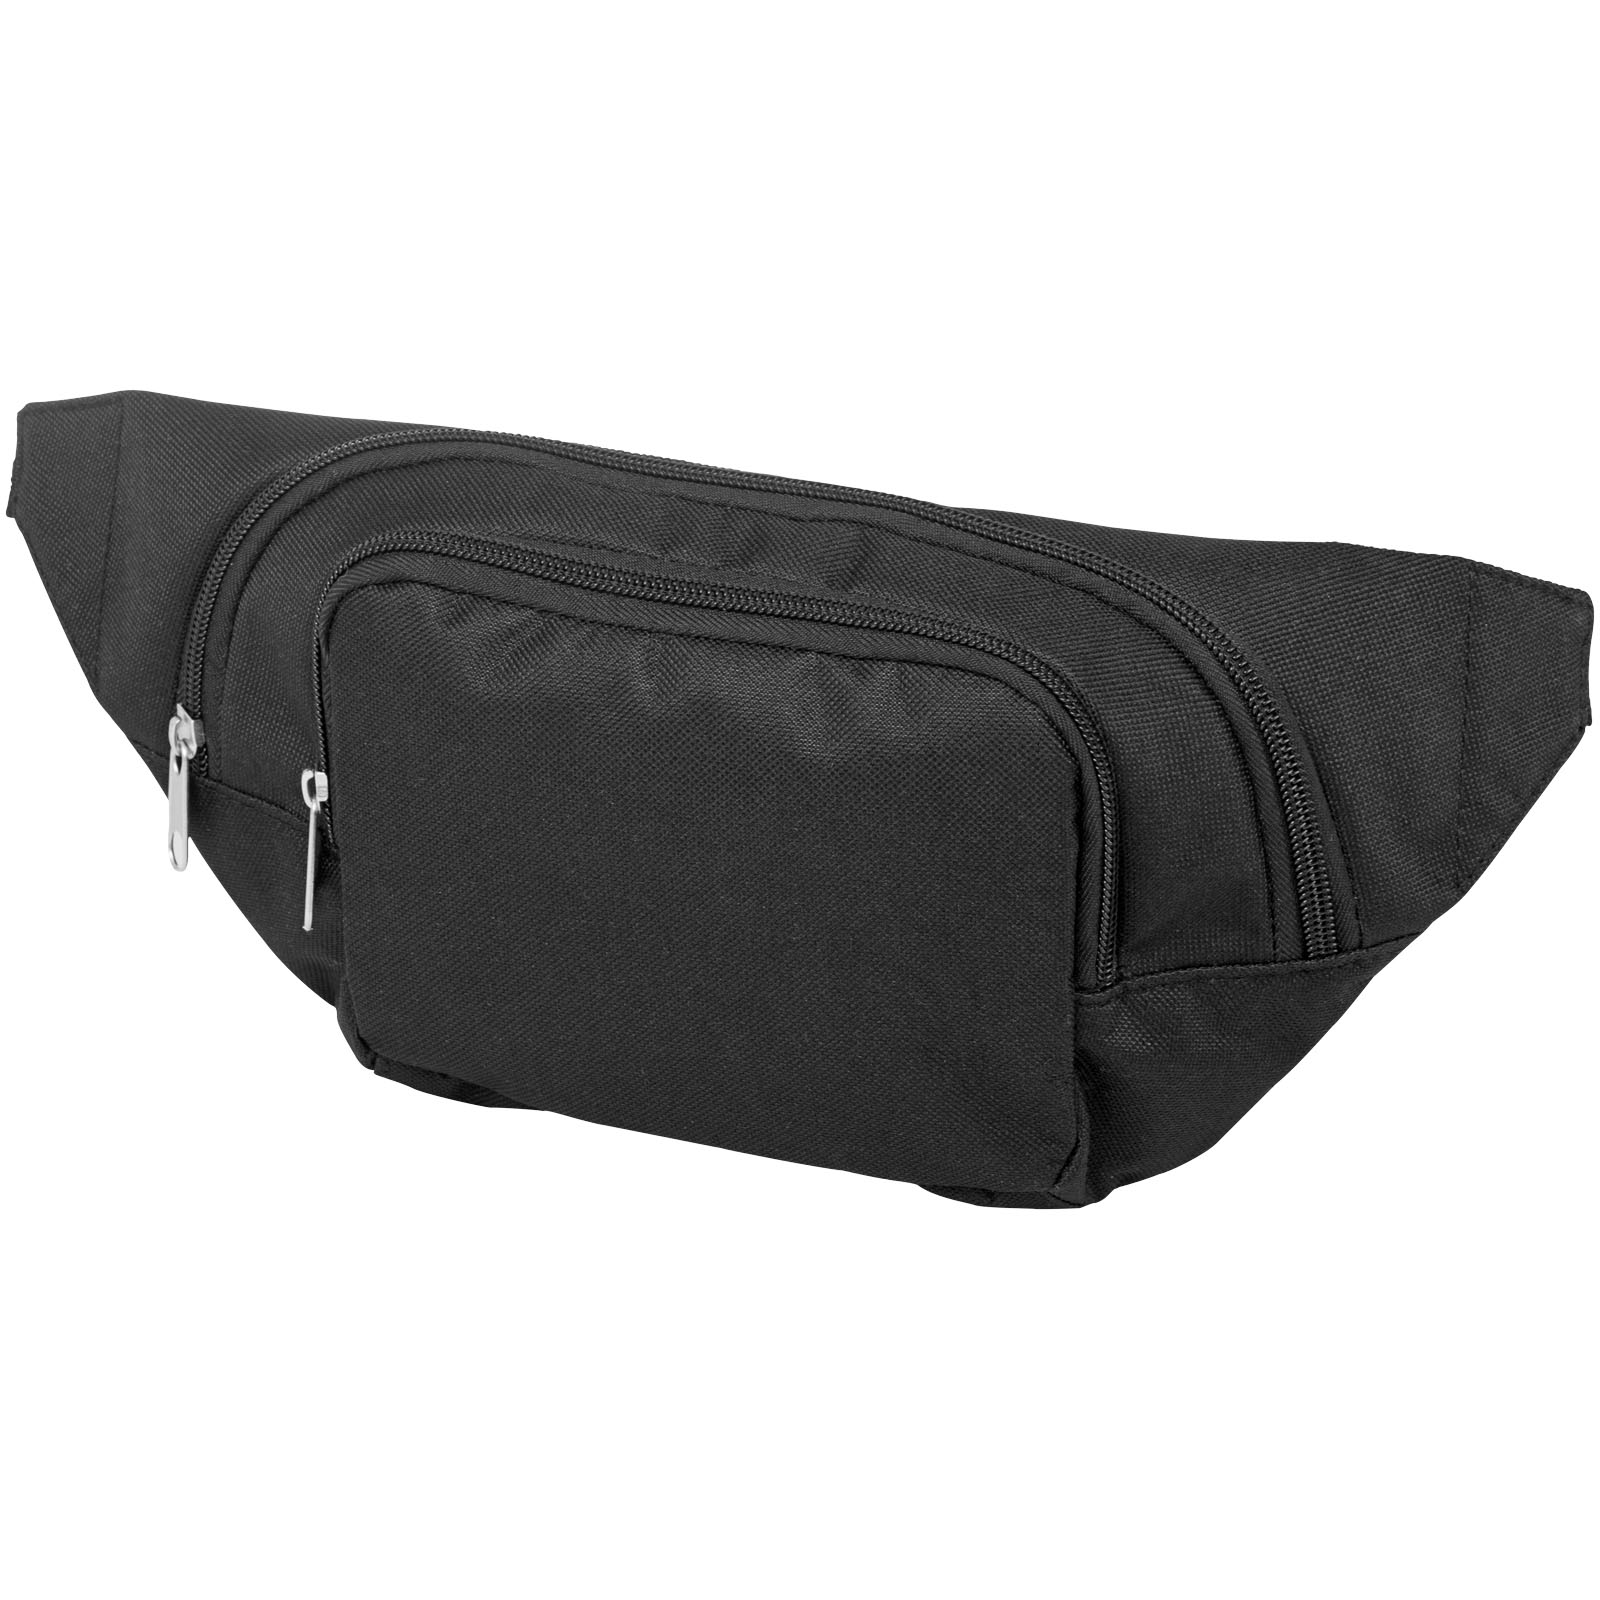 Travel Accessories - Santander fanny pack with two compartments